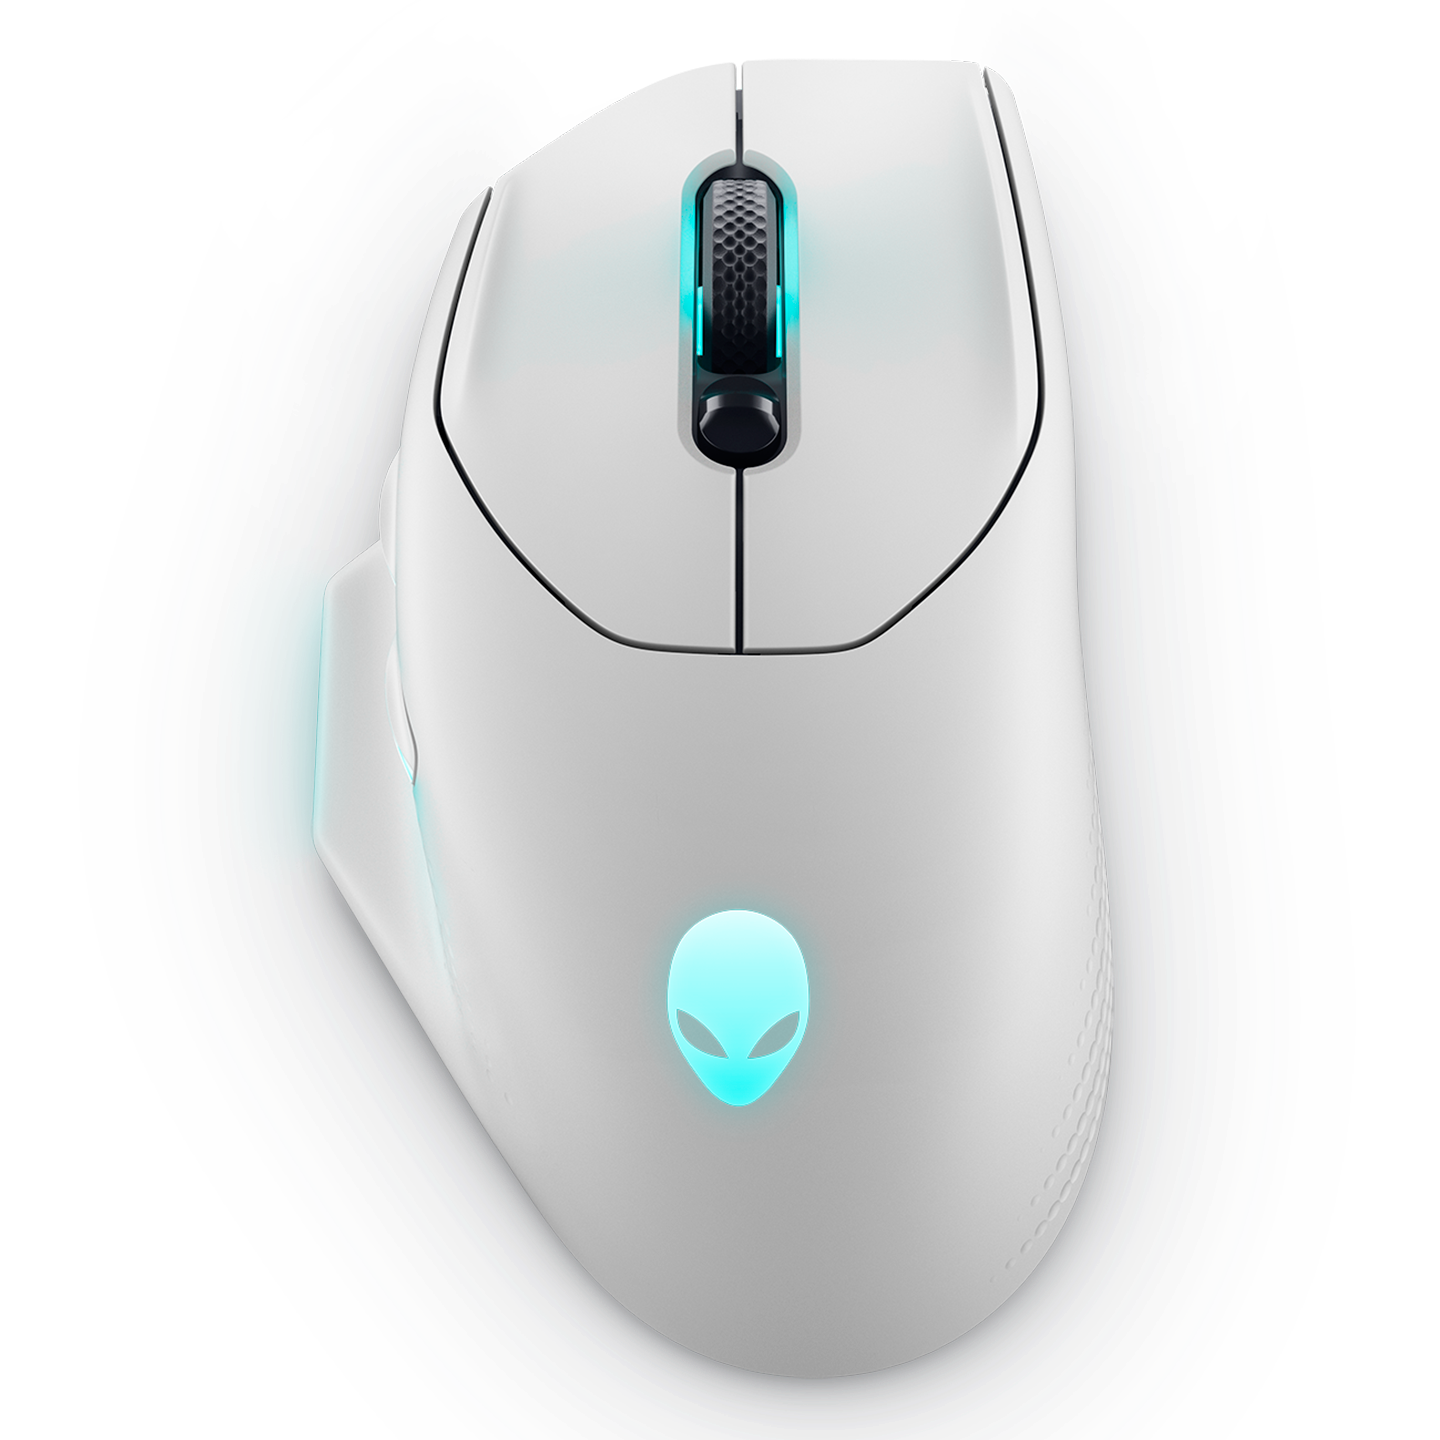 prod-449652-accessories-mouse-alienware-aw620m-1440x1440.png